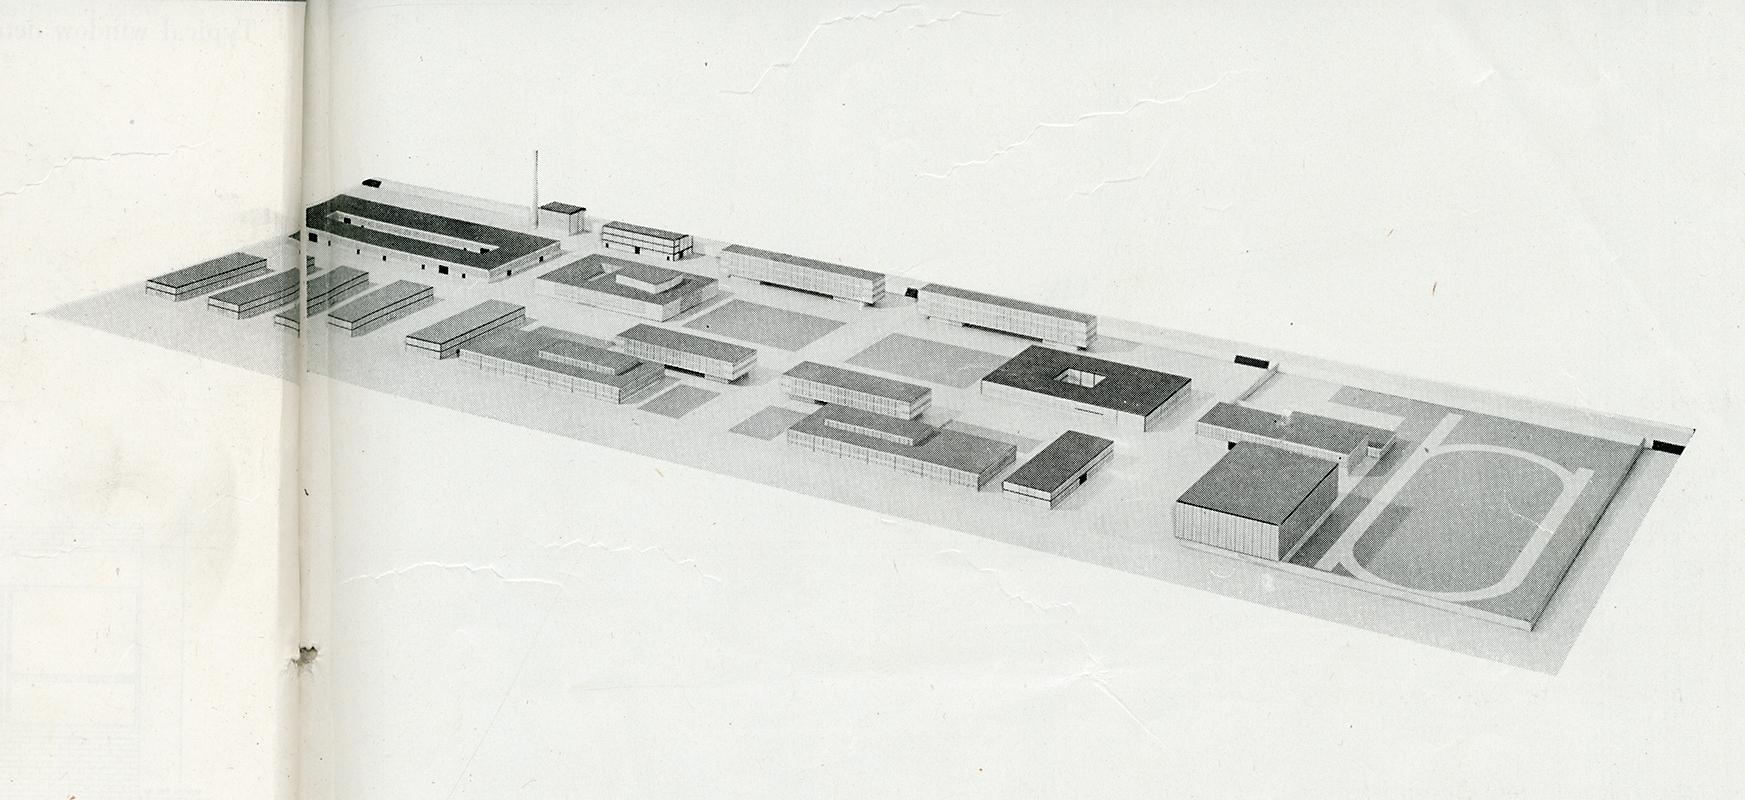 Mies van der Rohe. Arts and Architecture. Mar 1952, 29